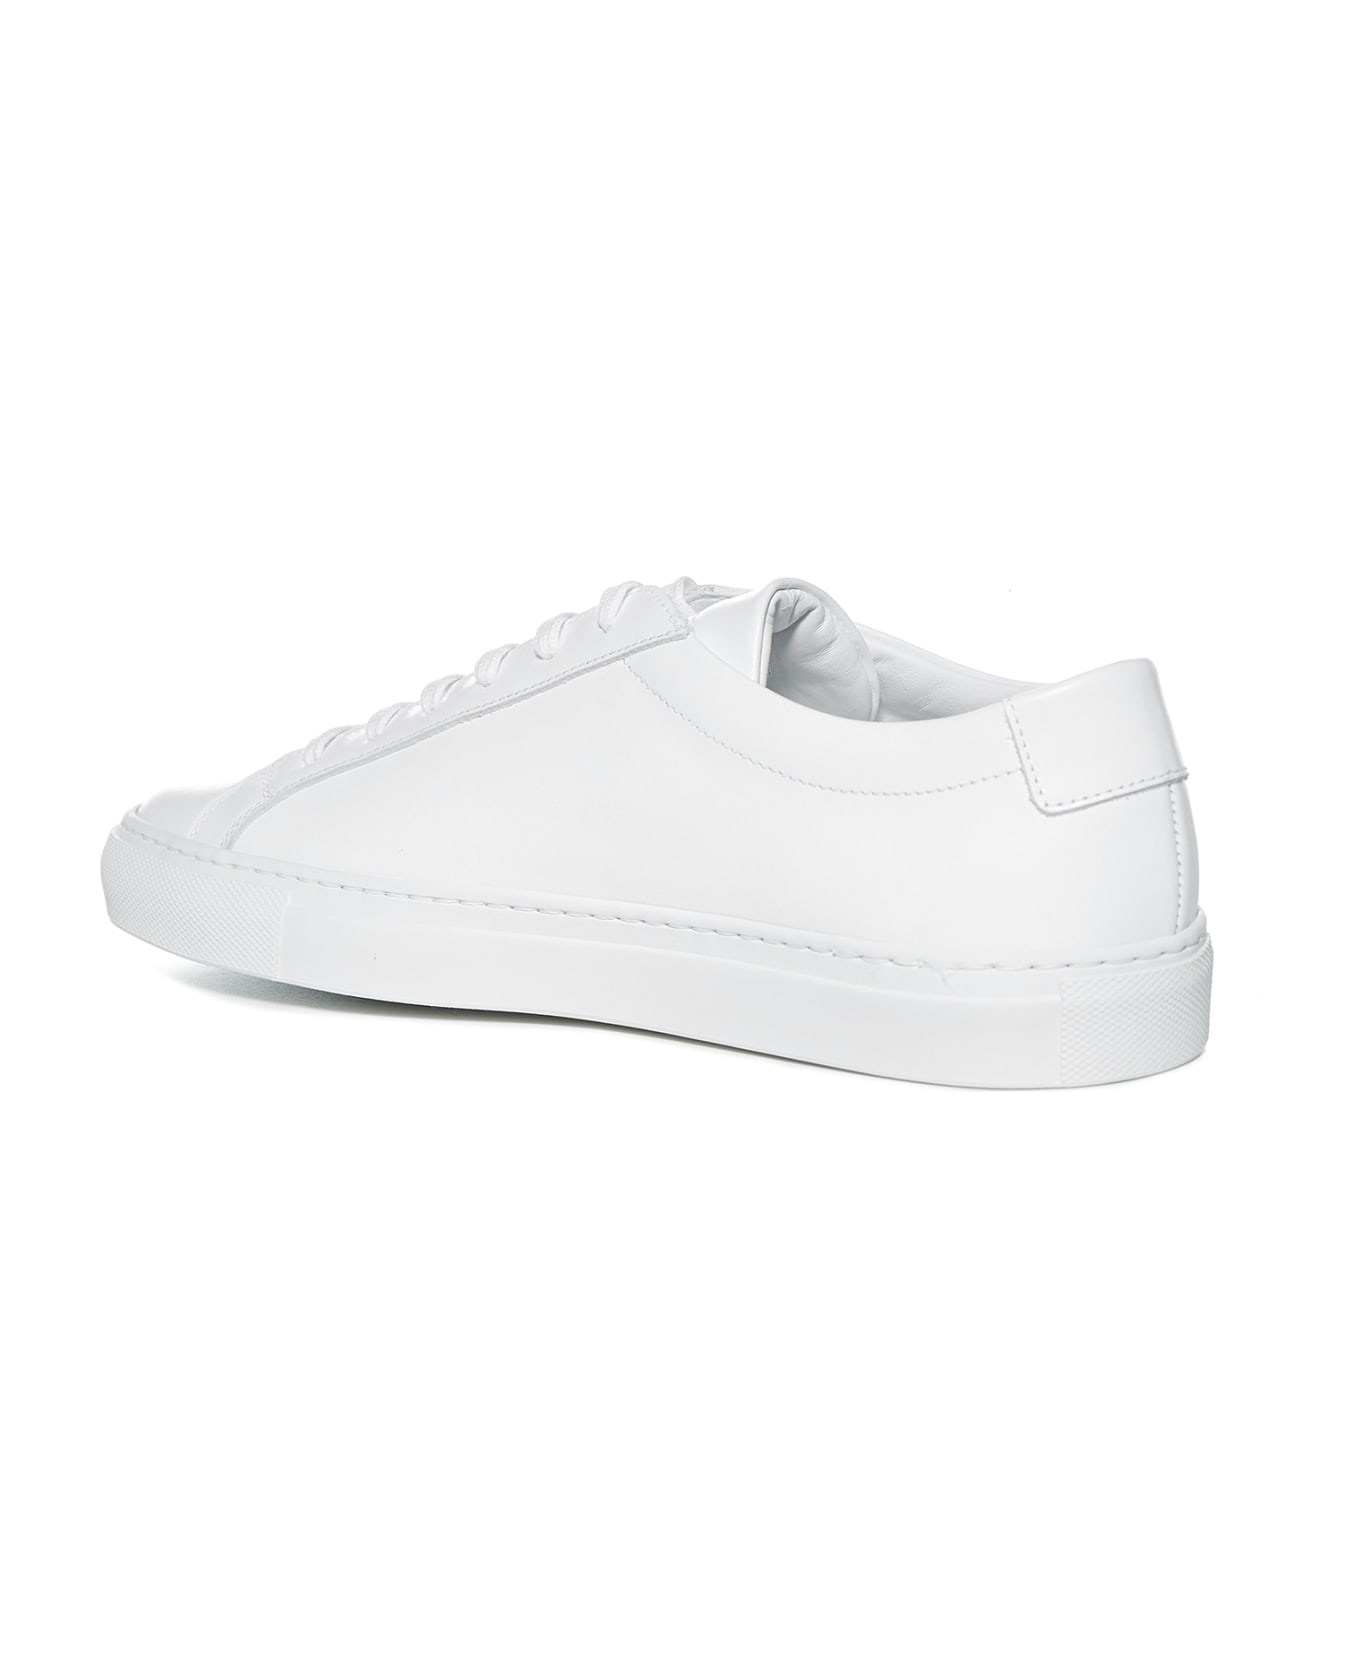 Common Projects Original Achilles Sneakers - White スニーカー